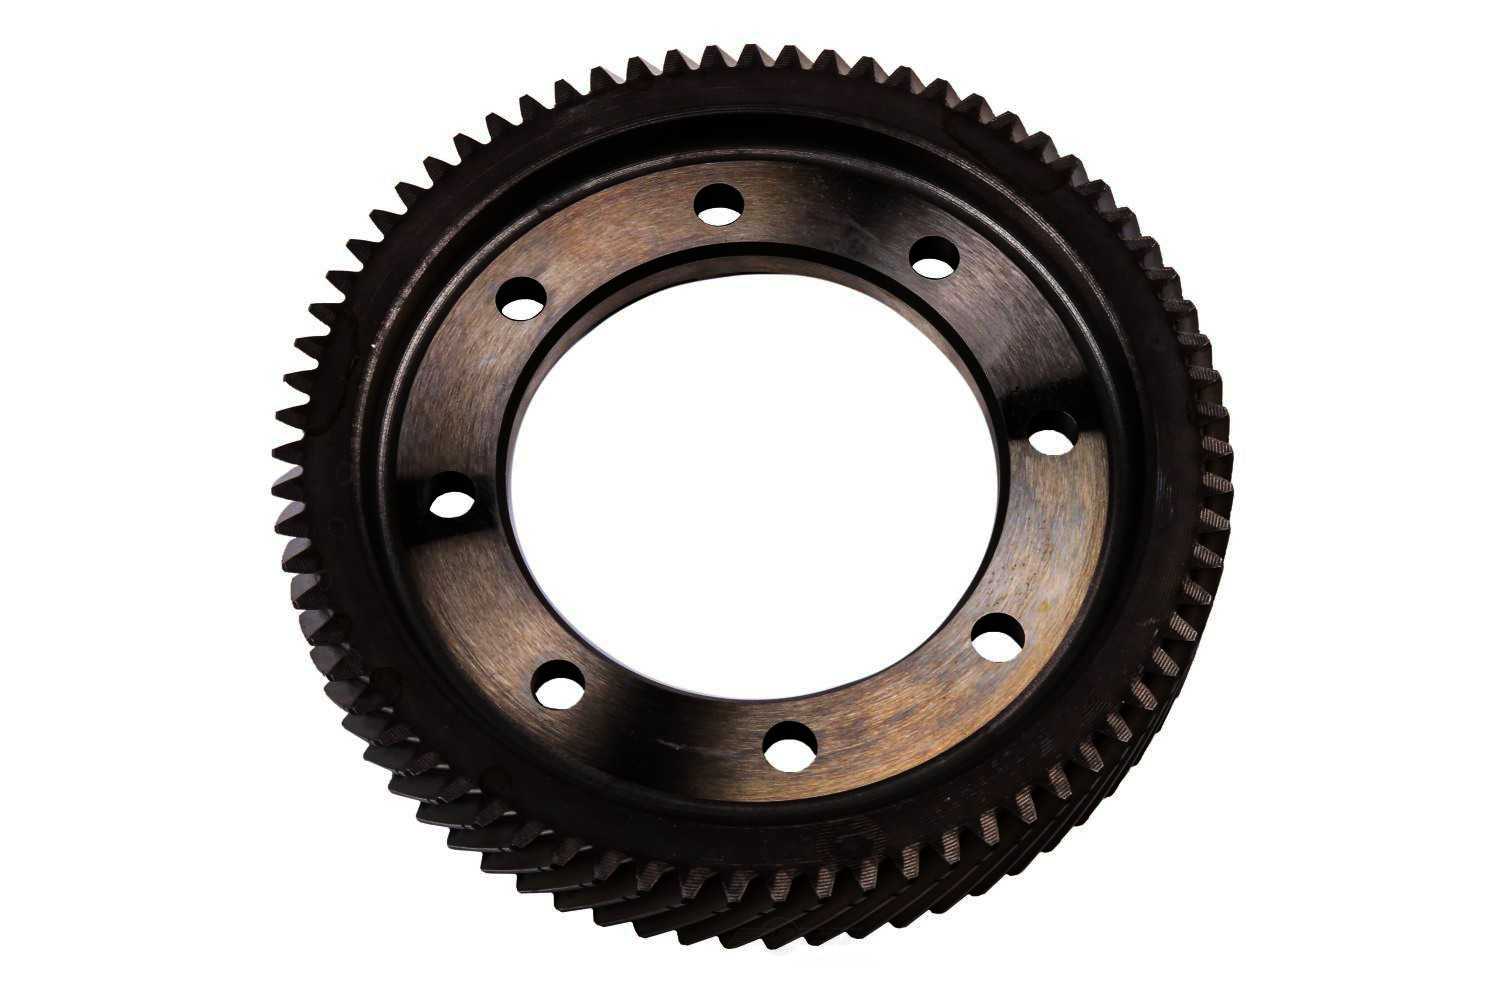 GM GENUINE PARTS - Differential Ring Gear - GMP 55567483